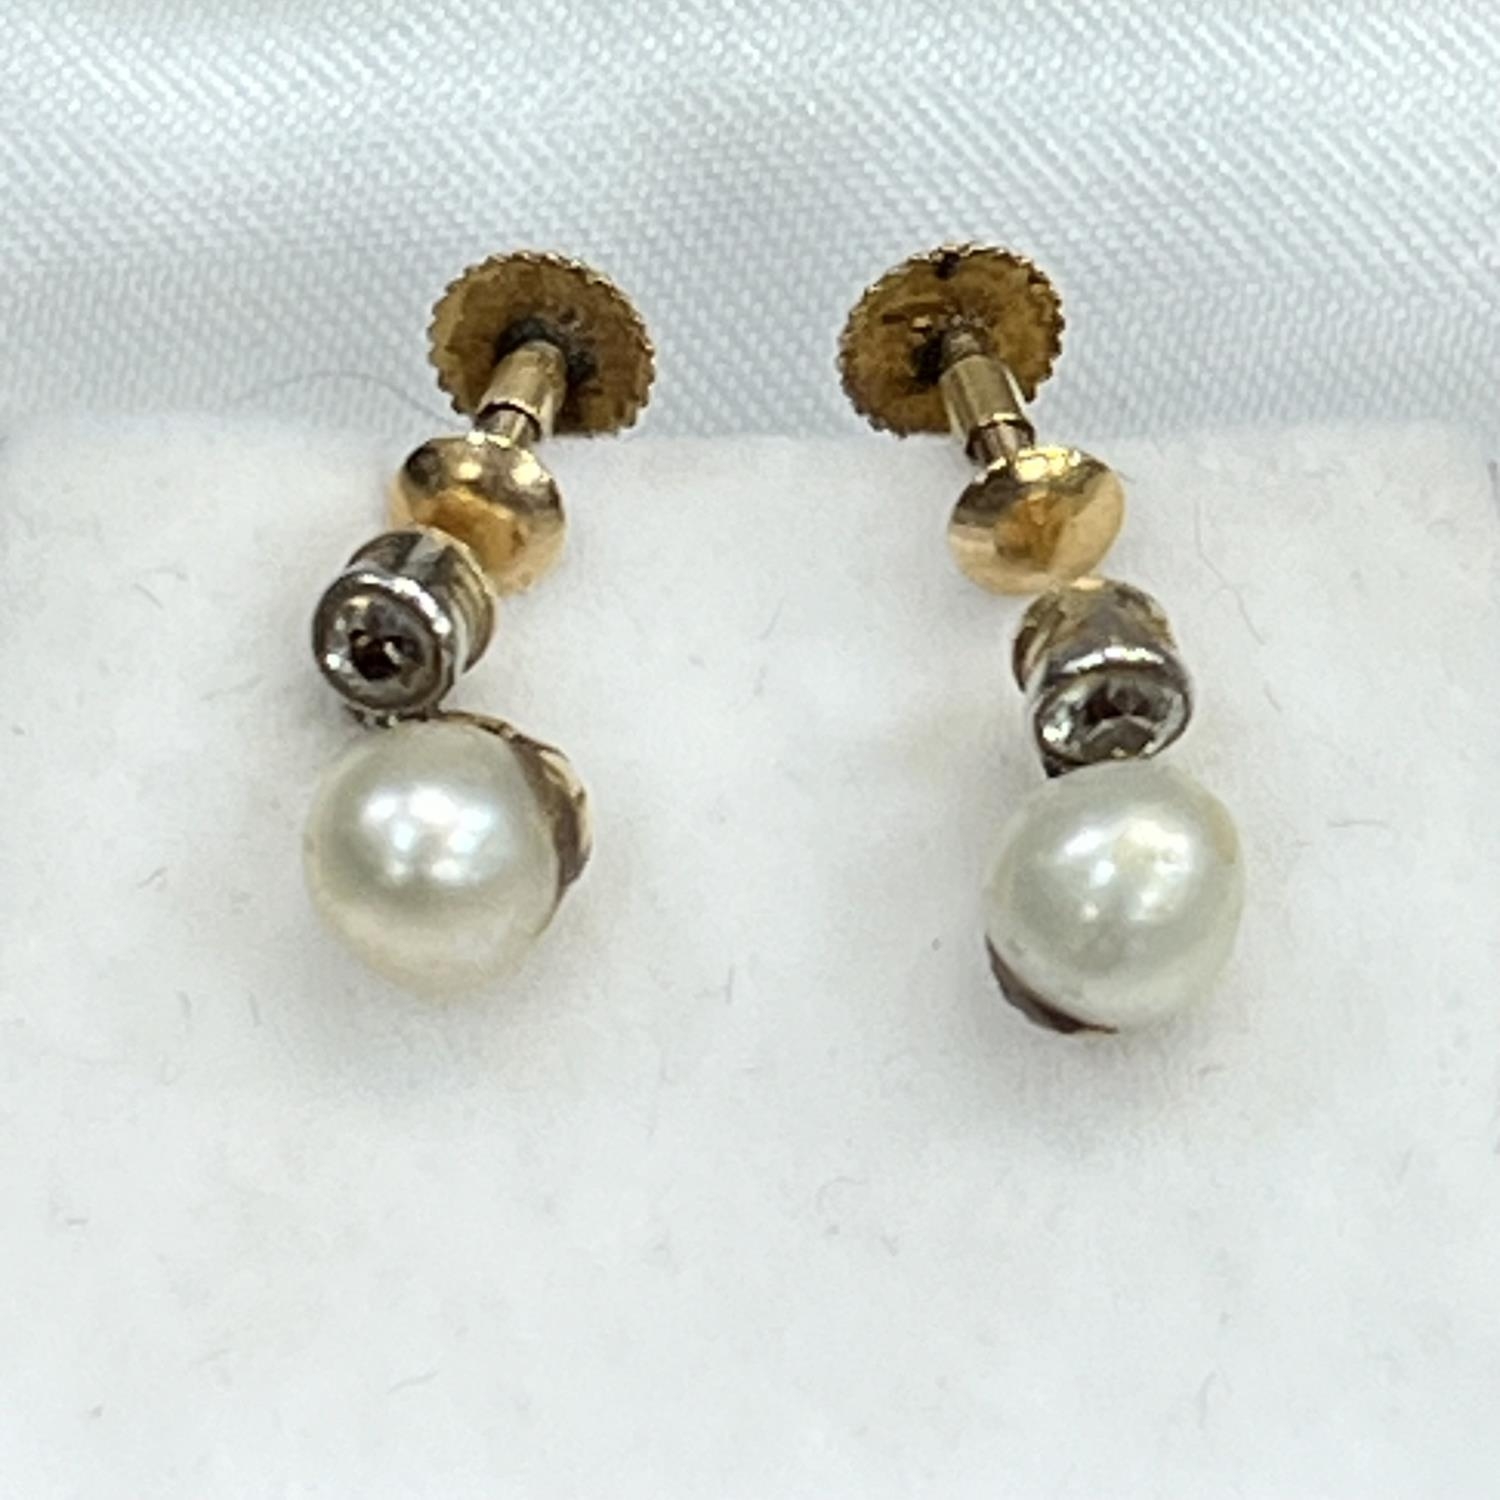 A pair of cultured pearl and diamond earrings, c1920, in 9ct gold, each 5.5mm pearl pendant from a - Image 2 of 2